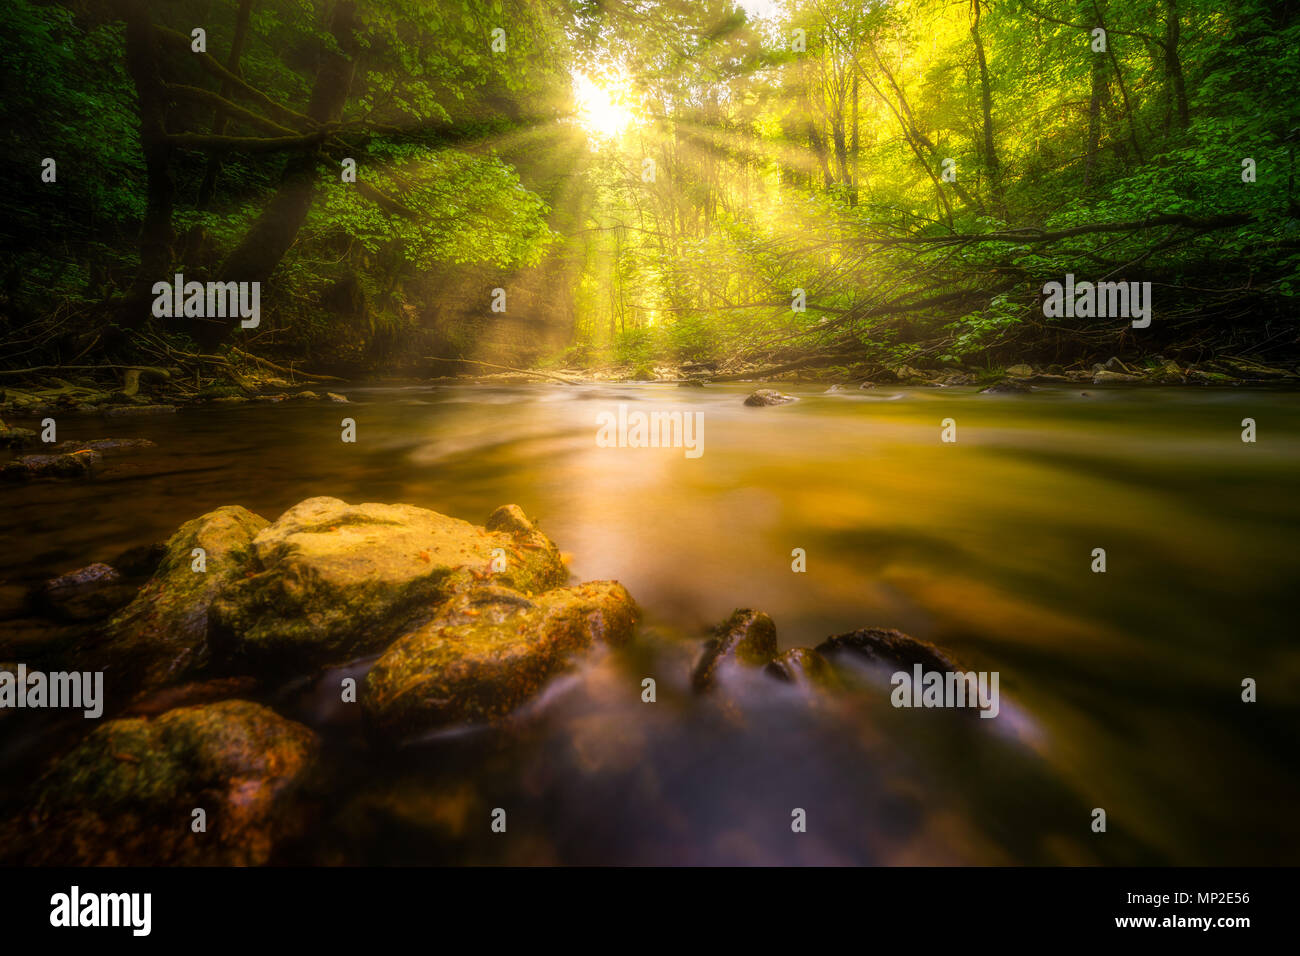 Long exposure in the Wutachschlucht with sunbeams and a very warm mood Stock Photo